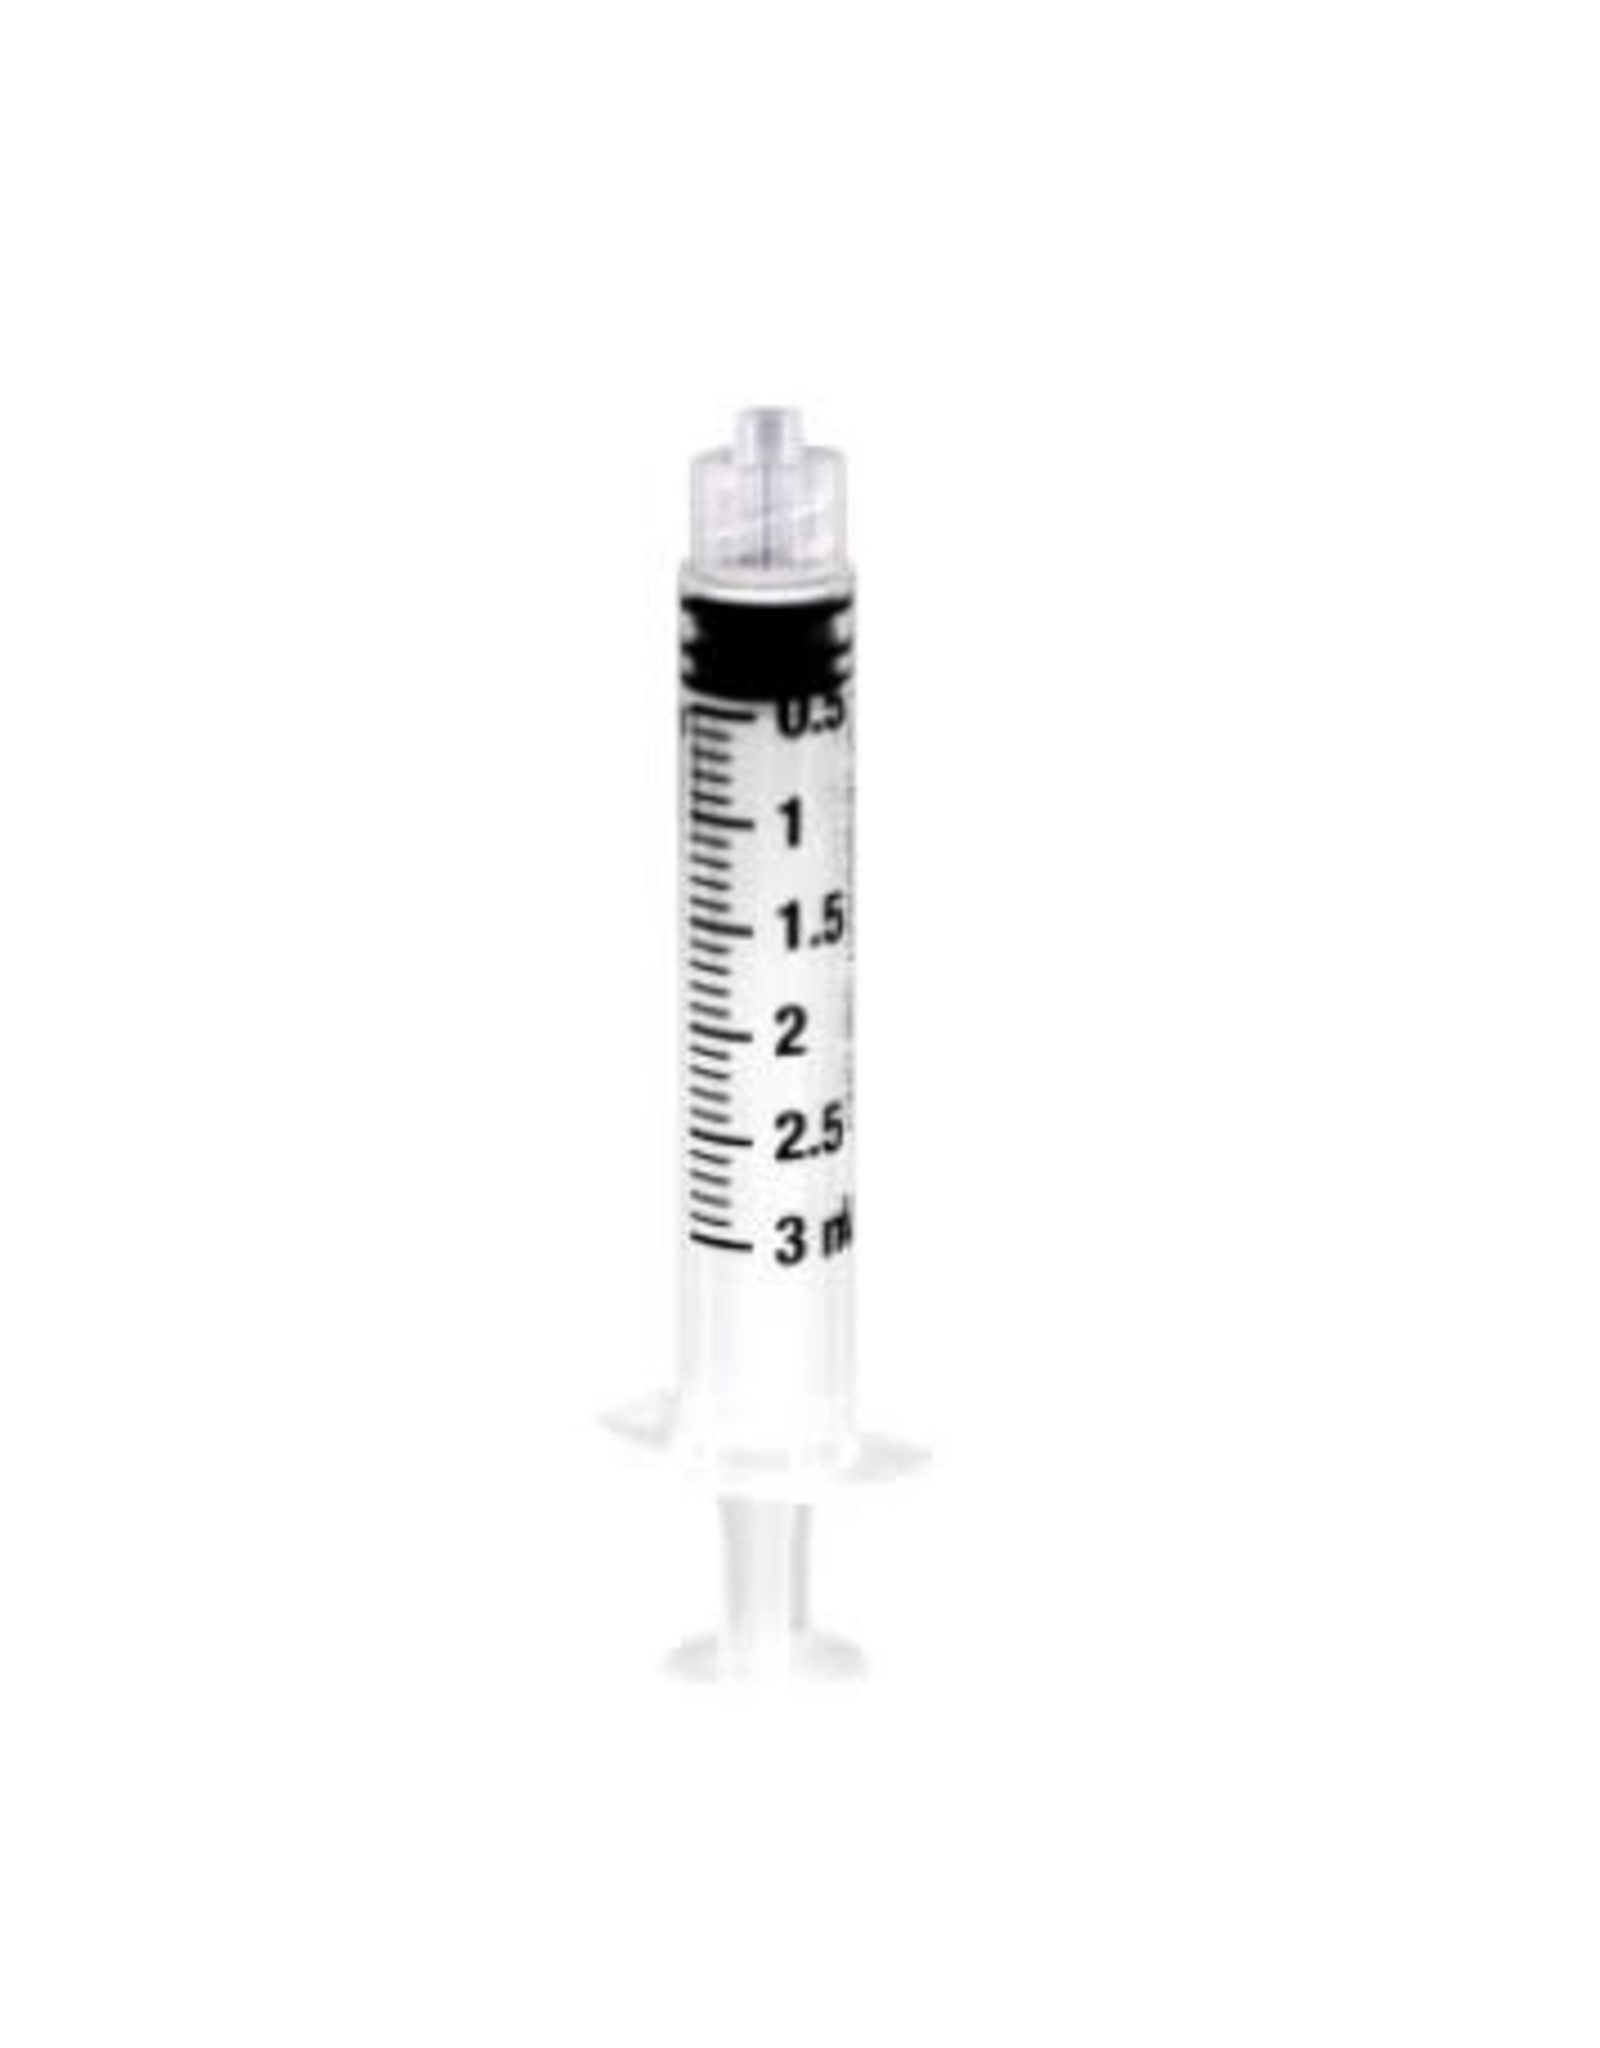 Ideal Luer Lock Syringe - The Rusty Spur